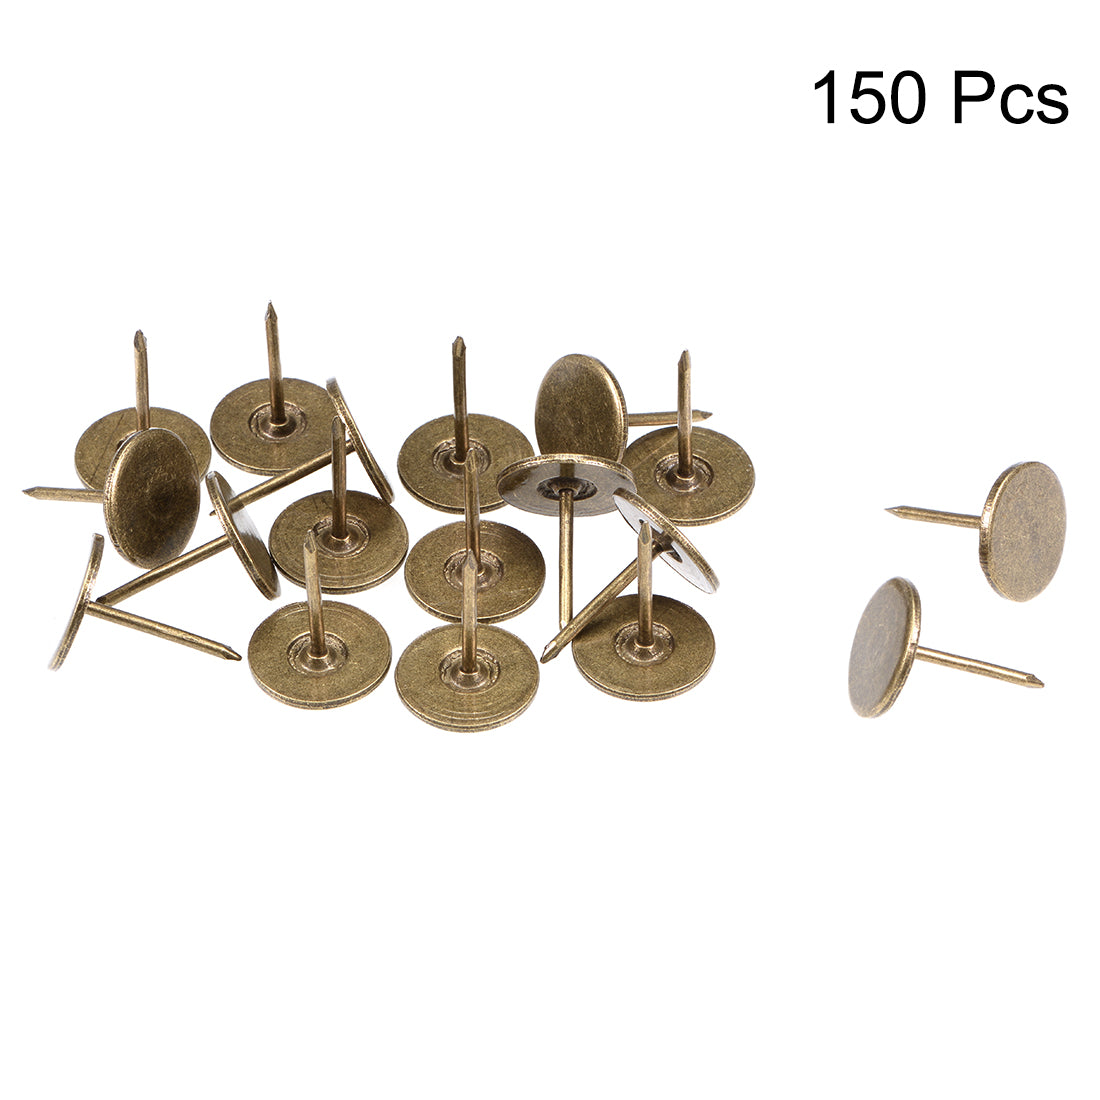 uxcell Uxcell Upholstery Nails Tacks 16mmx20mm Flat Head Furniture Nails Bronze Tone 150 Pcs